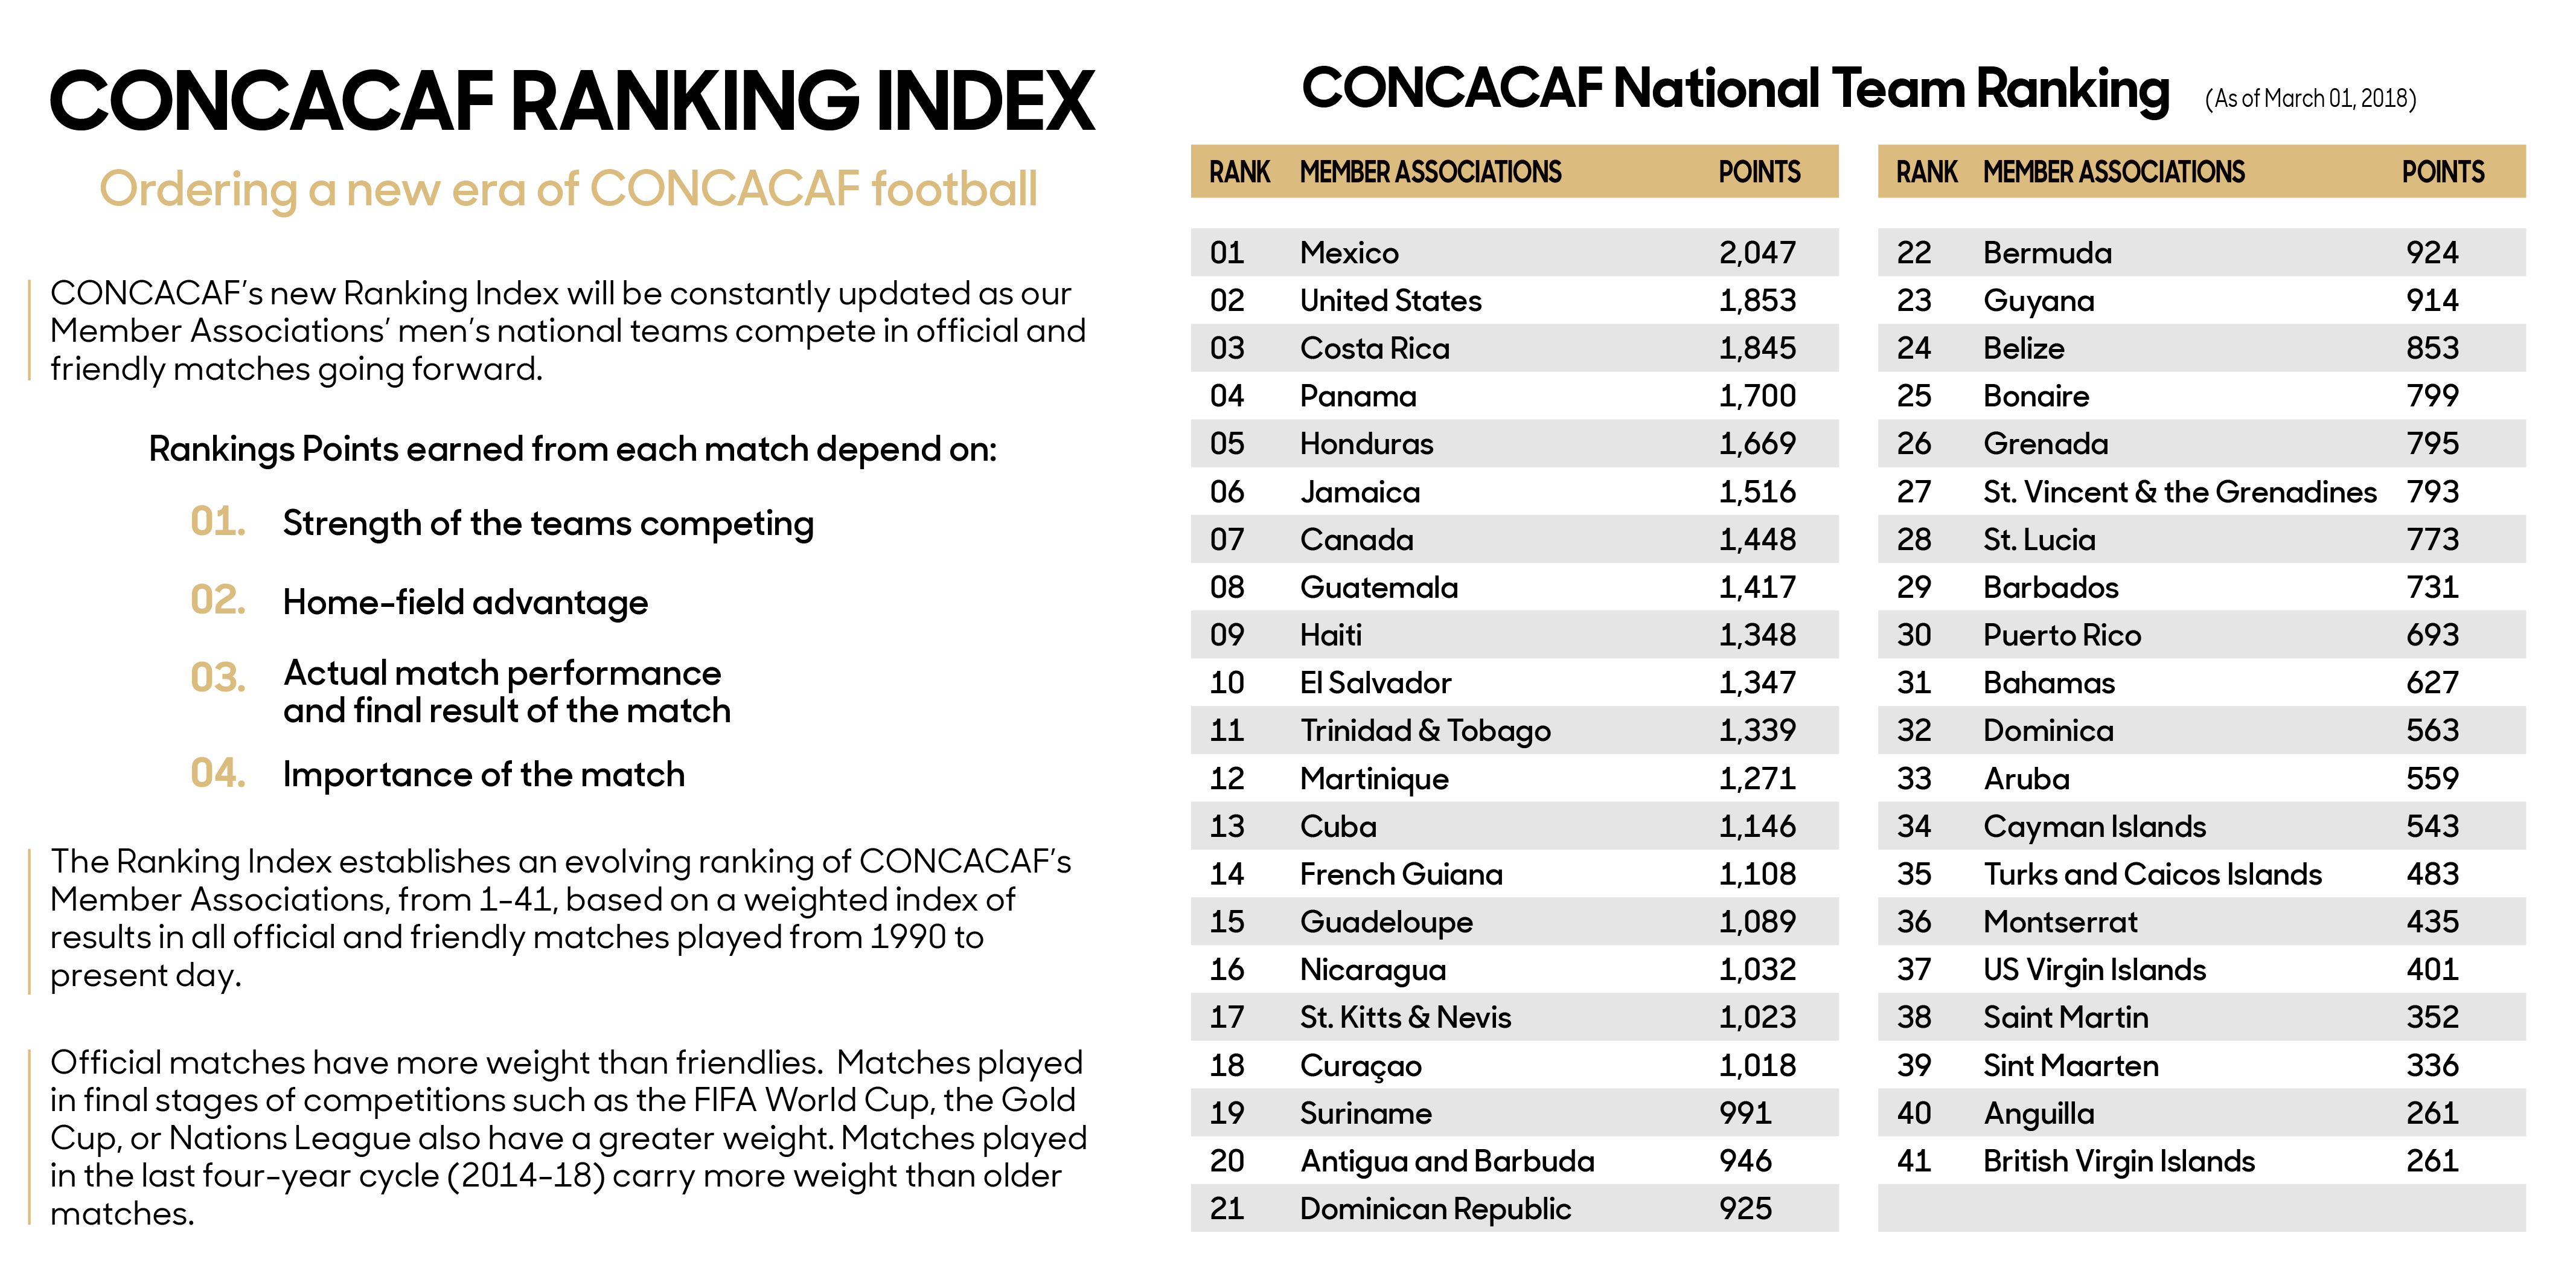 CONCACAF Ranking Index (March 2018)